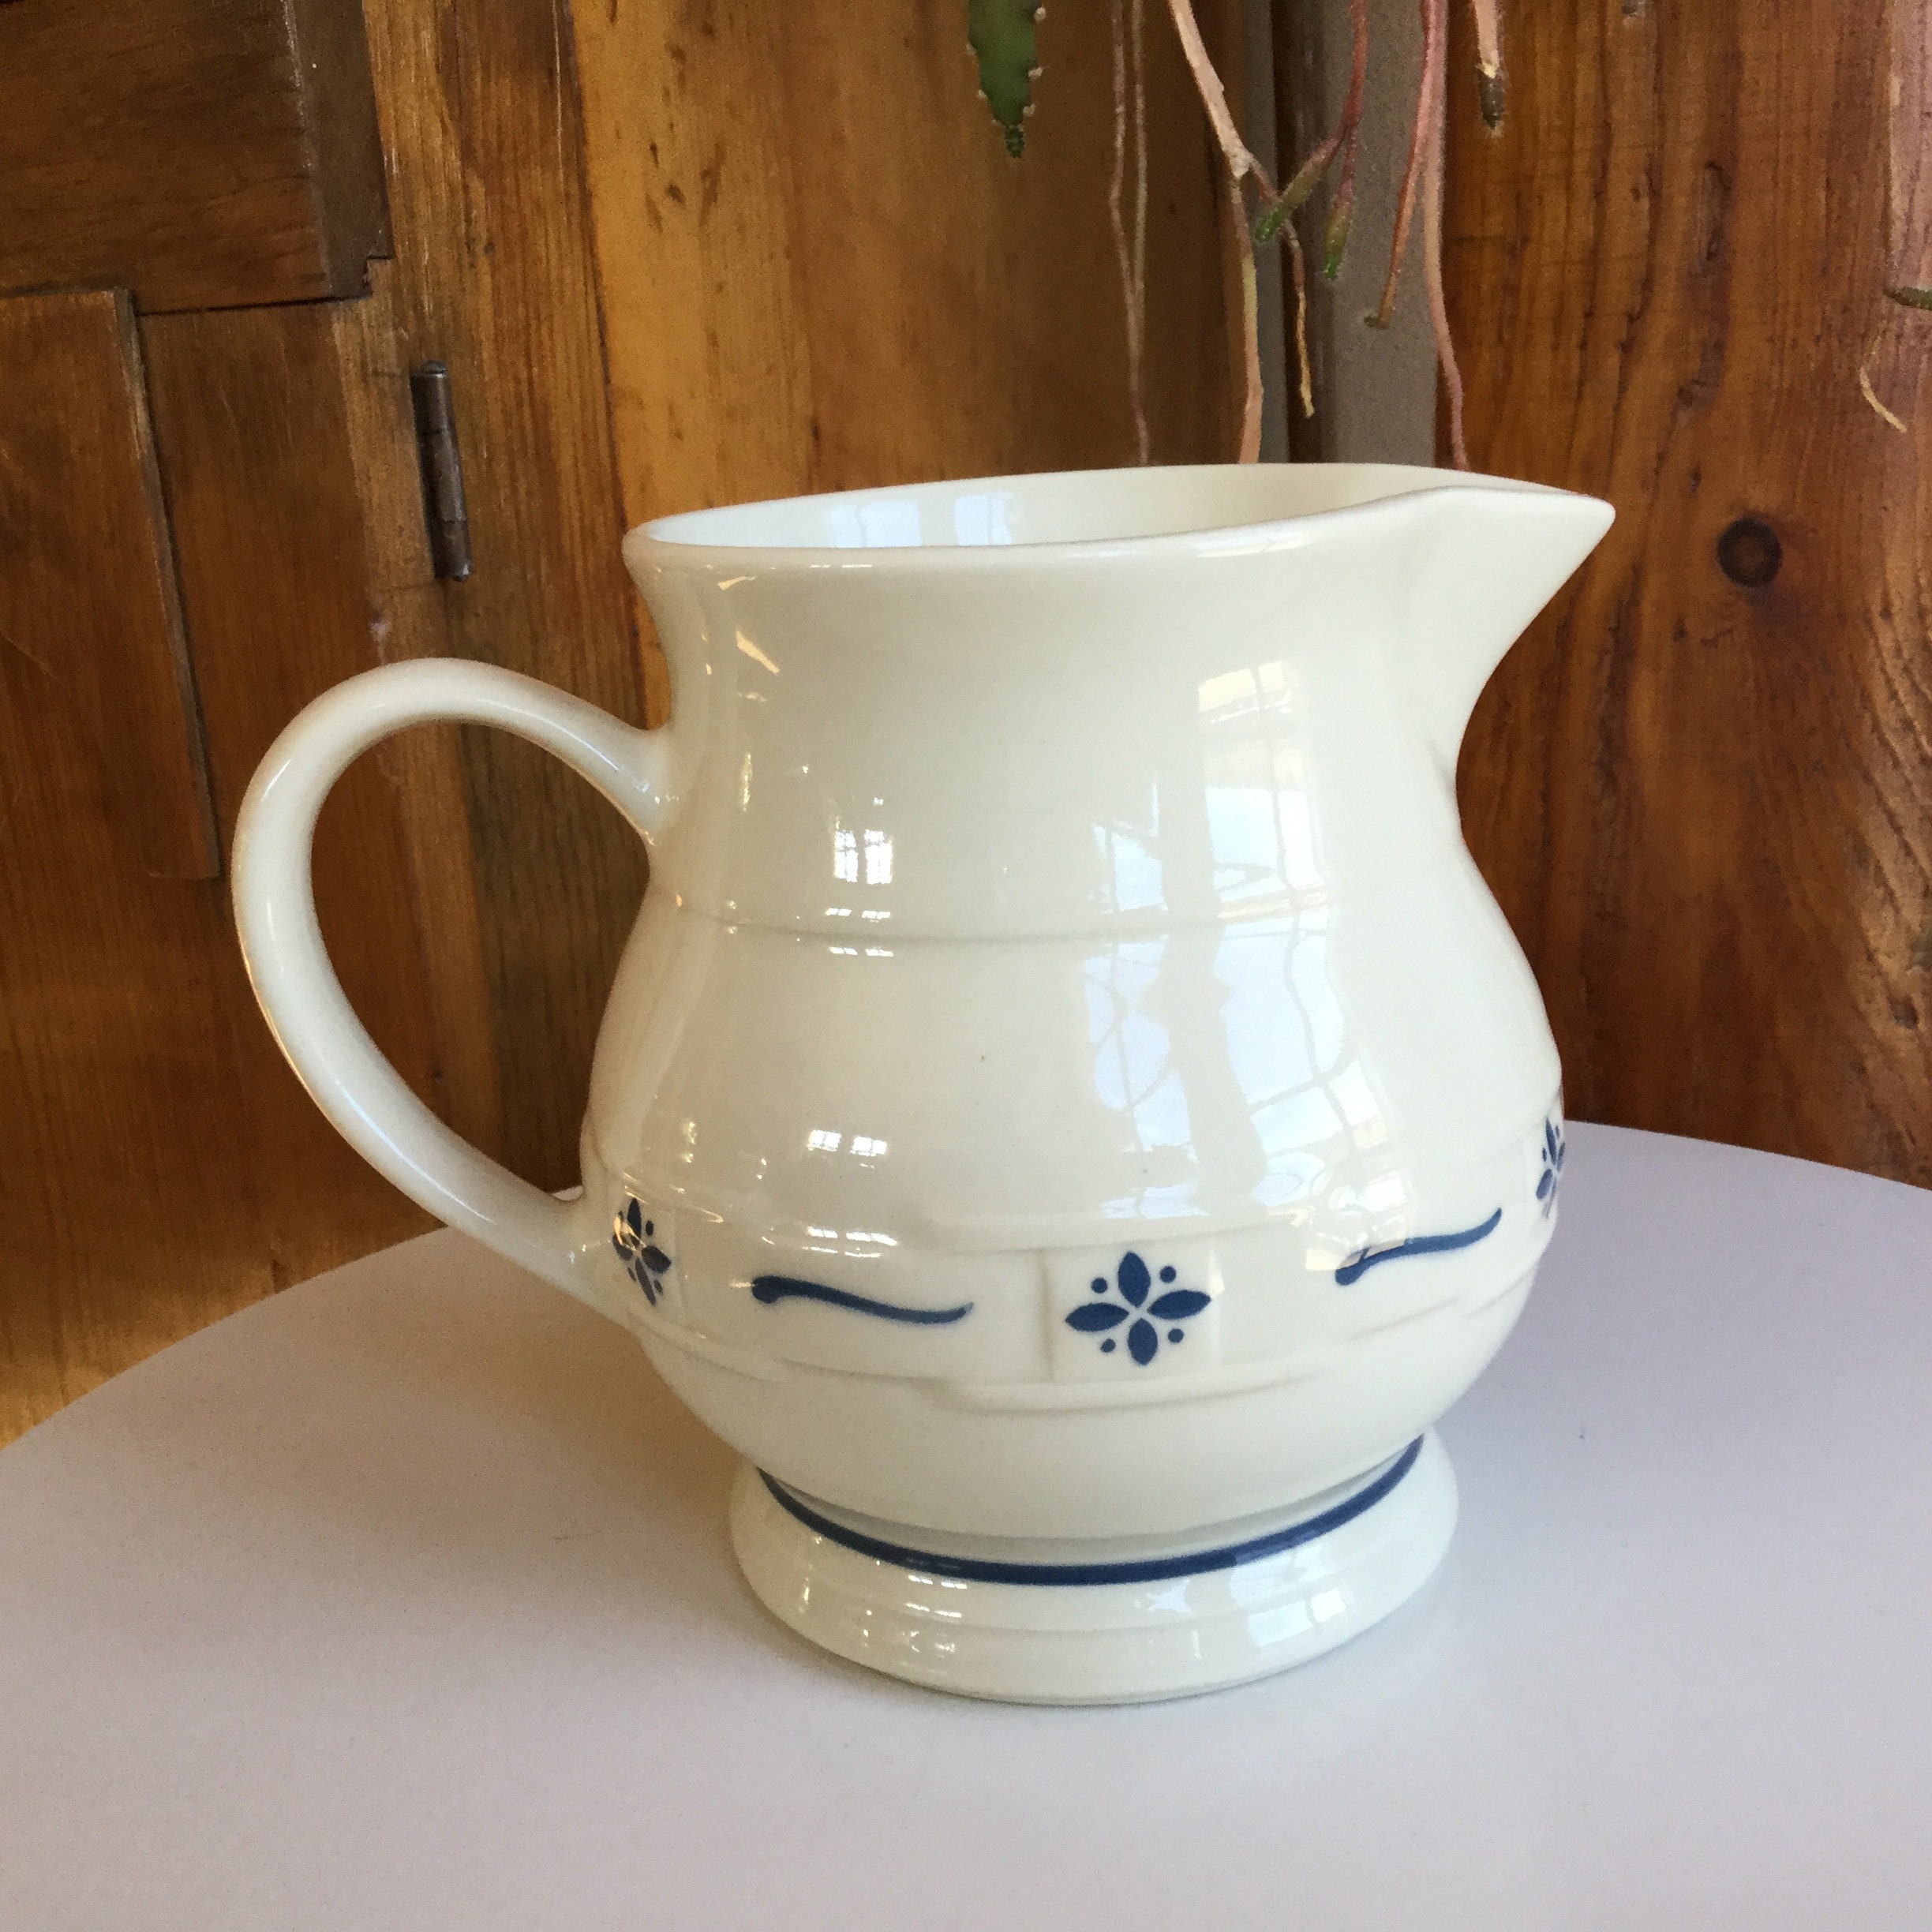 LONGABERGER Pottery WOVEN TRADITIONS Classic Blue 32 oz. Pitcher - FREE  SHIPPING